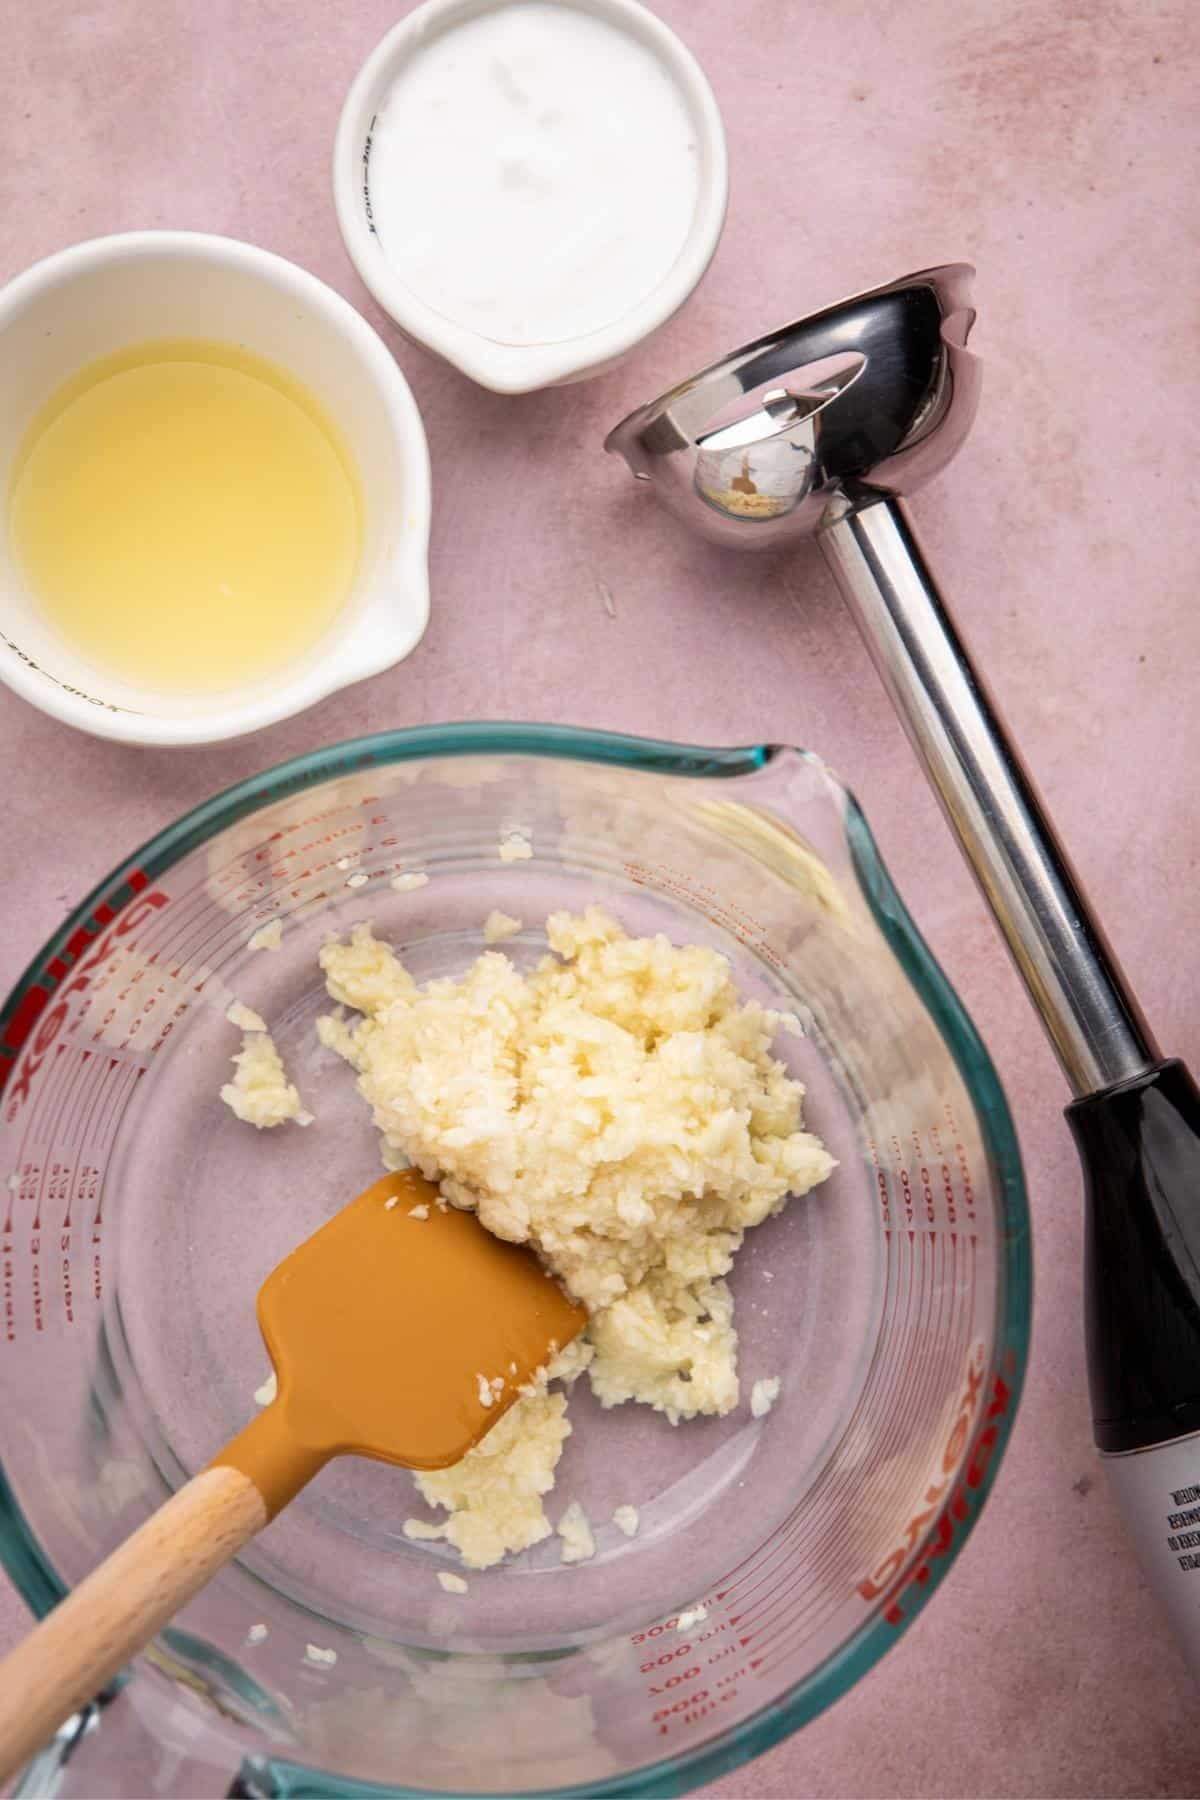 Transfer the minced garlic mixture into a deep, tall container, such as a measuring cup, to accommodate the immersion blender.